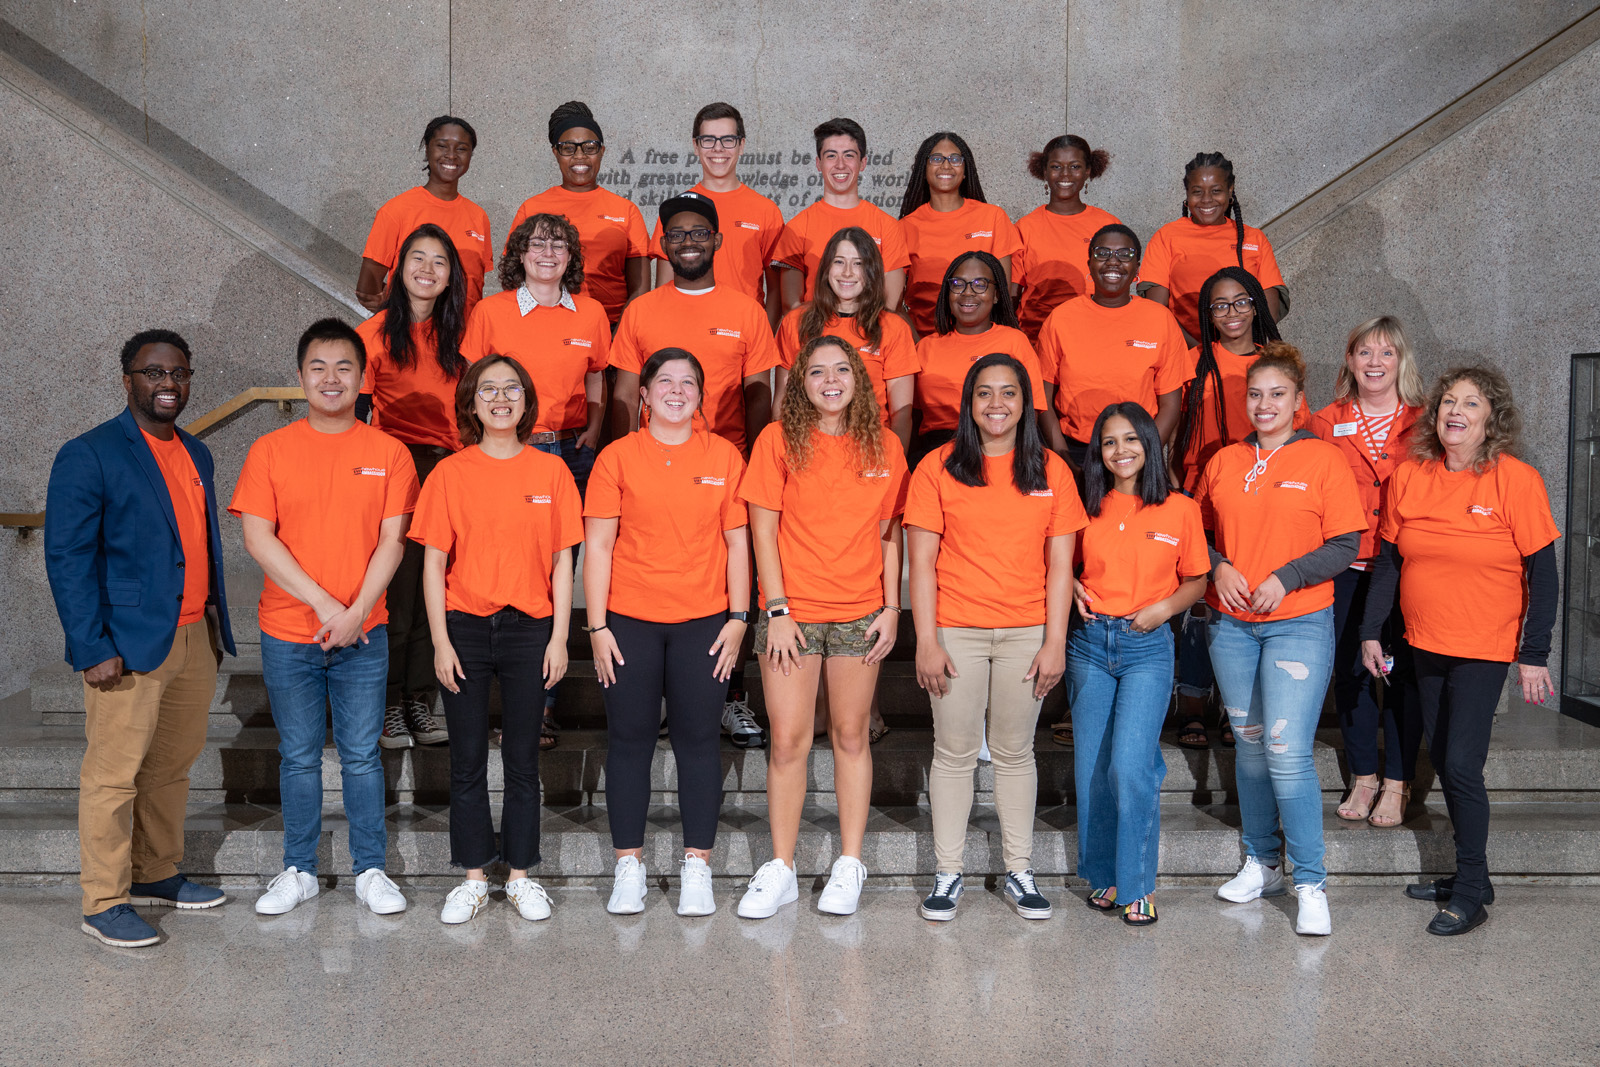 Newhouse Ambassadors in the Newhouse 1 lobby.